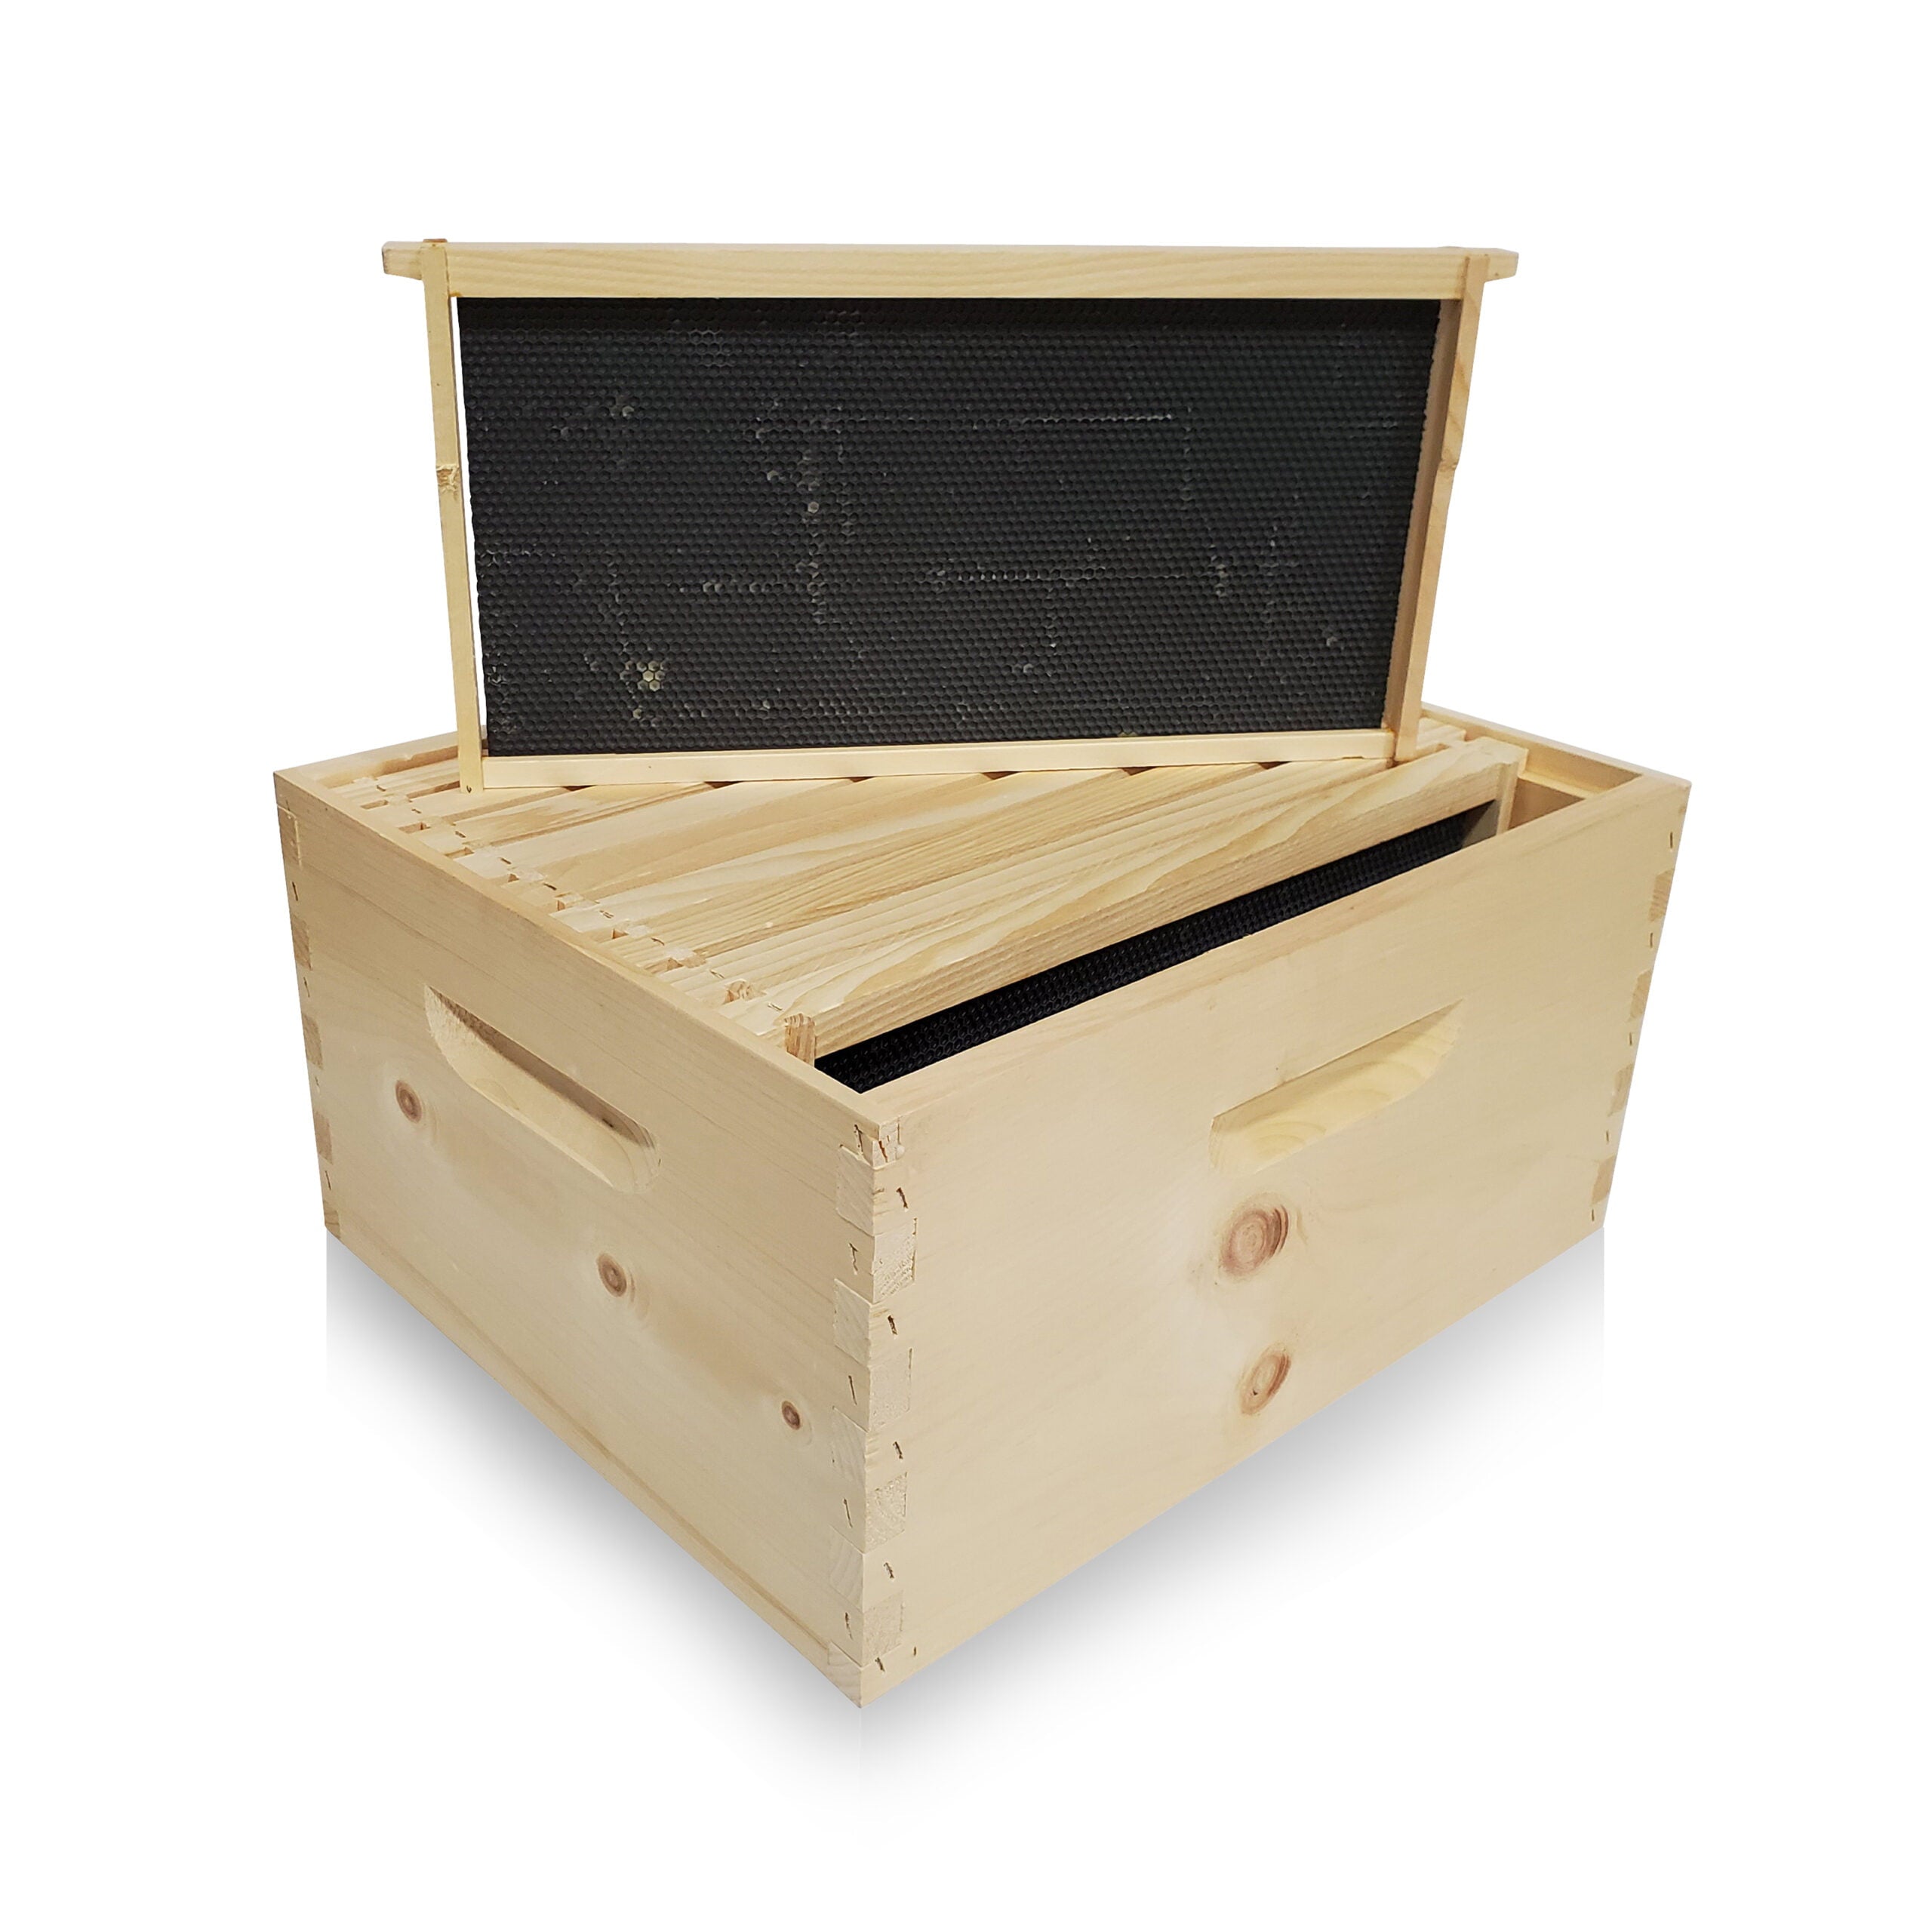 Assembled Deep Hive Body with Frames - 10 Frame For beekeeping